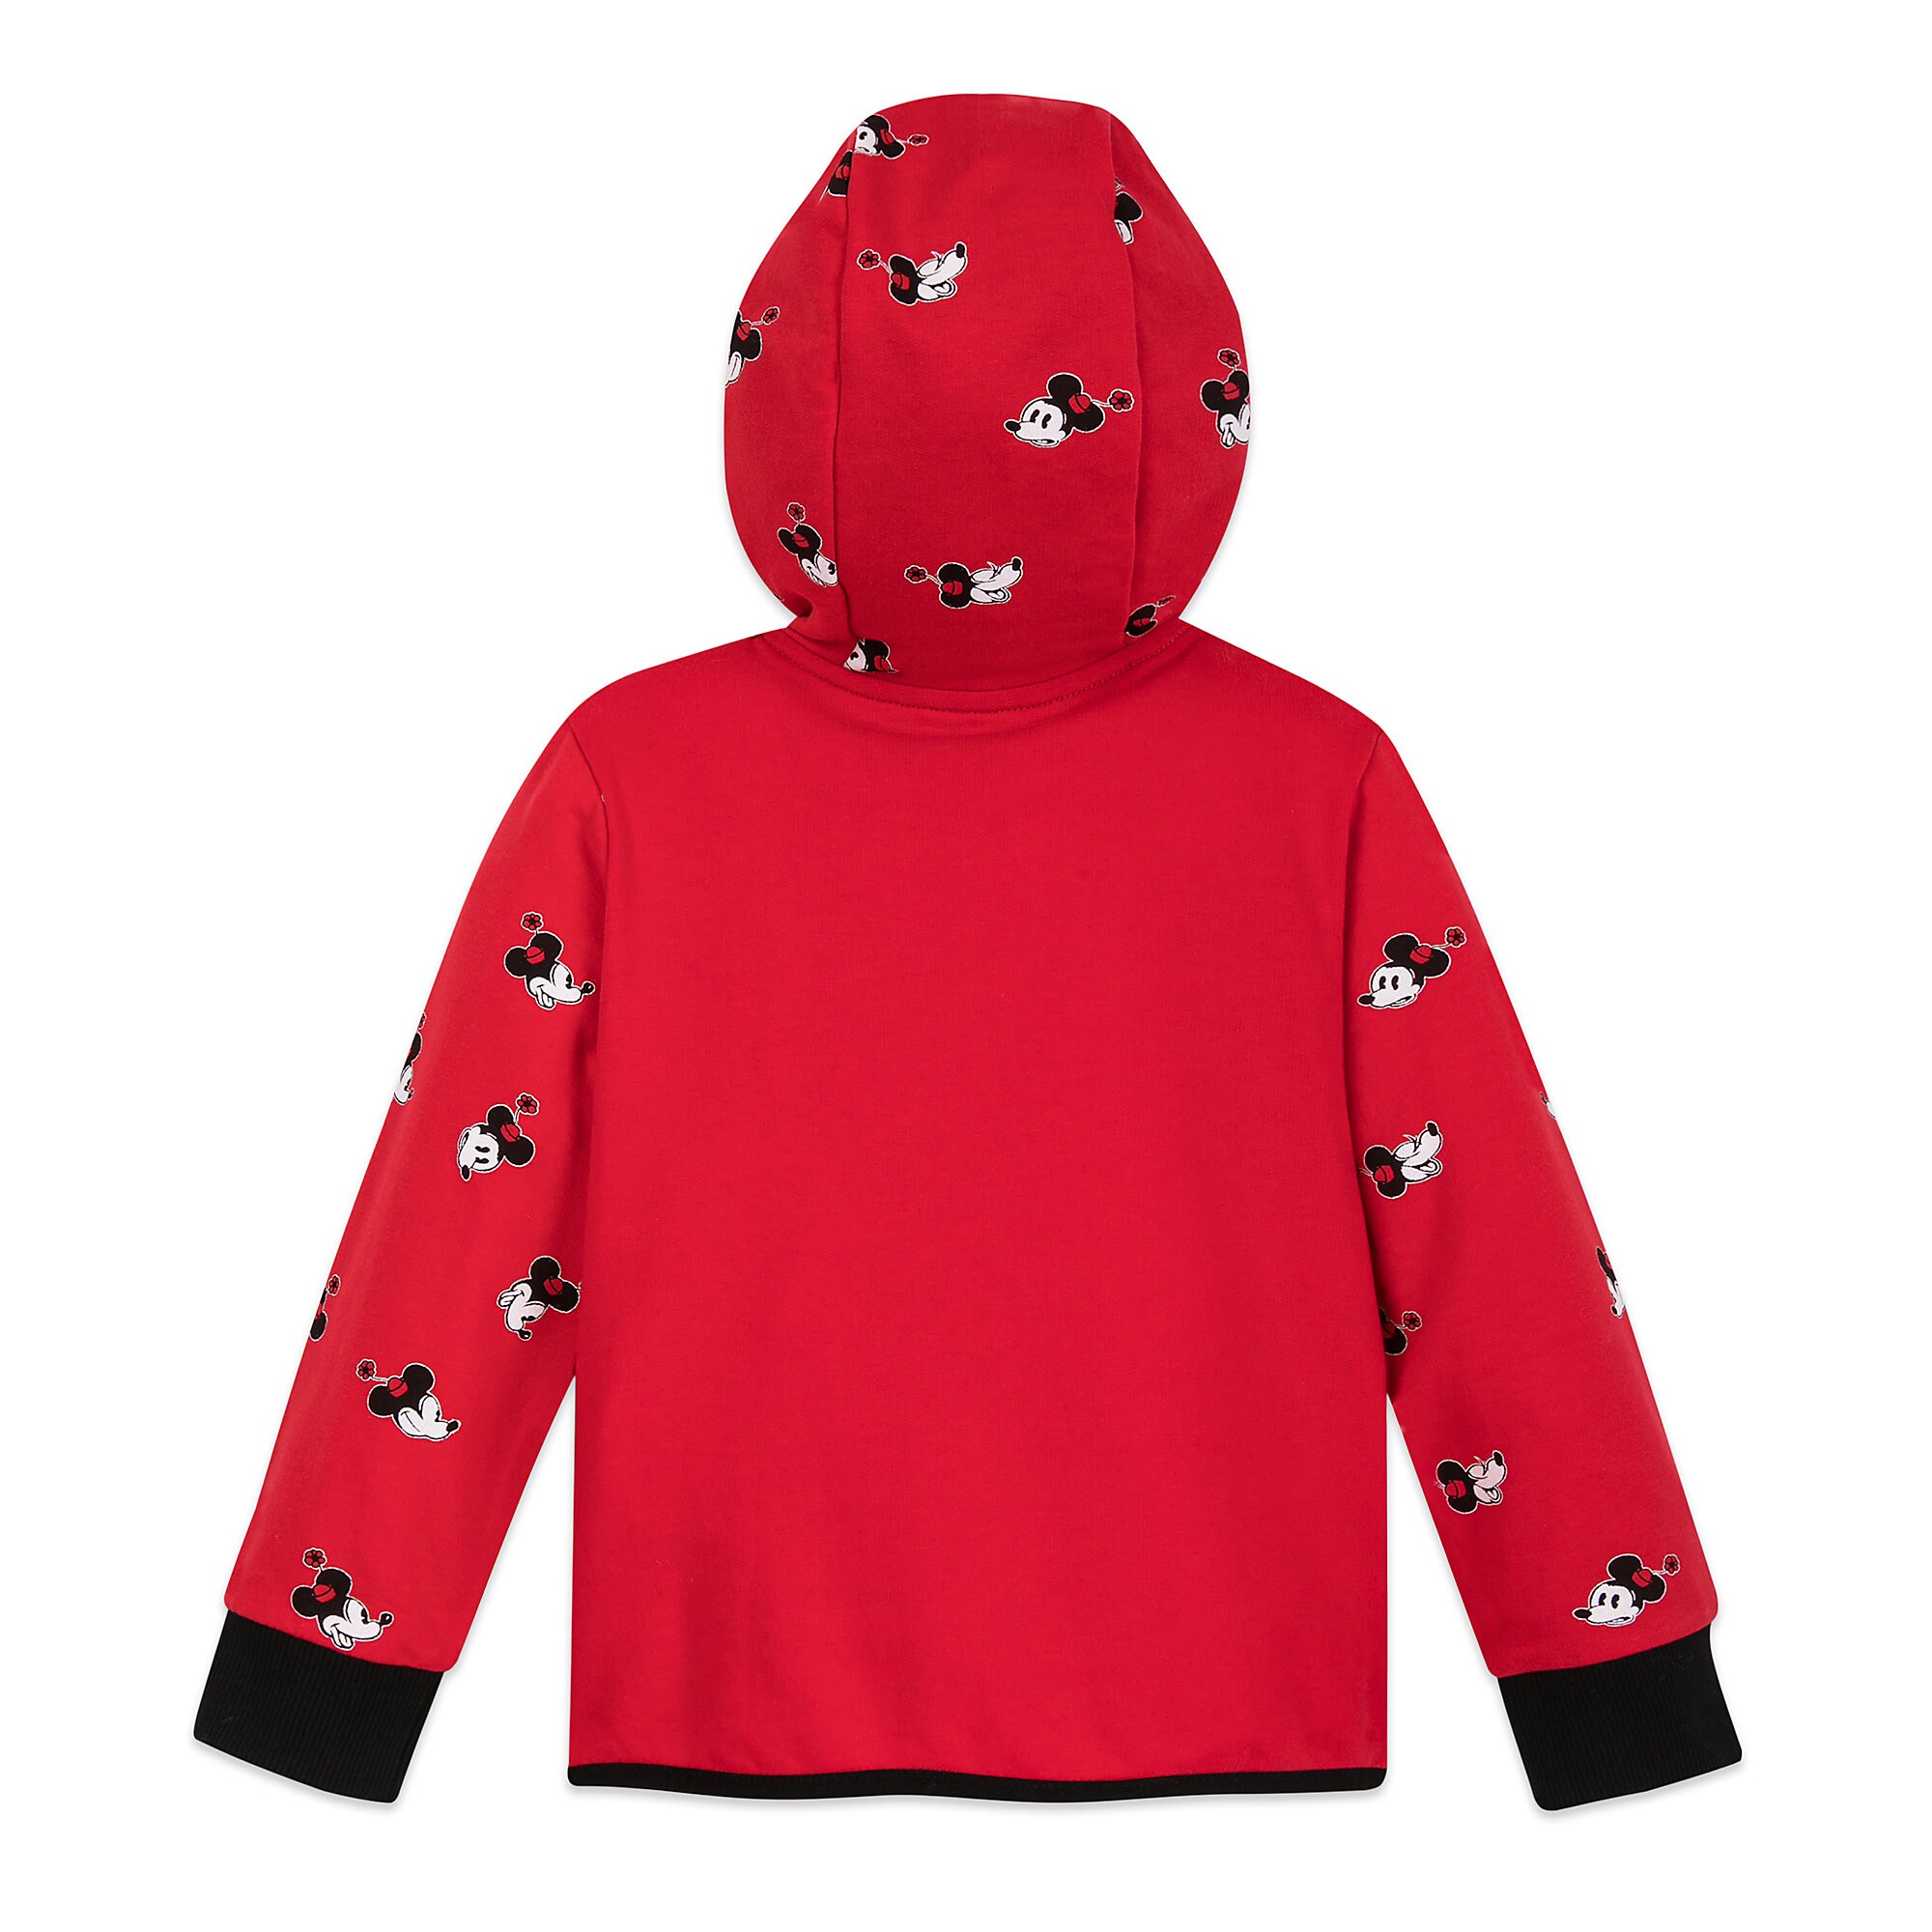 Minnie Mouse Zip-Up Hoodie for Kids - Personalized